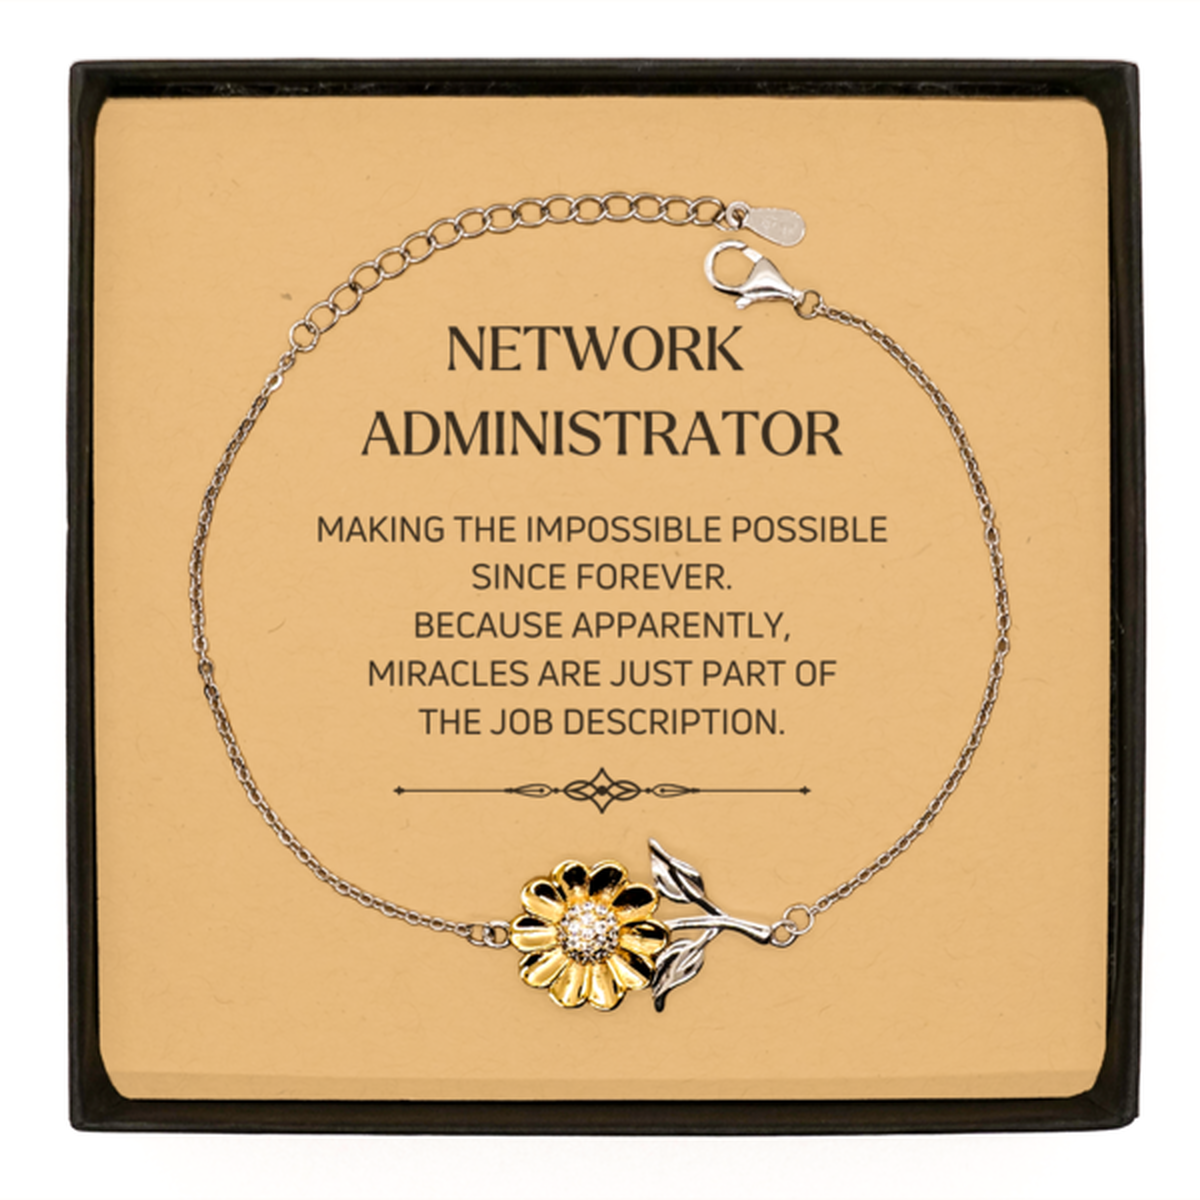 Funny Network Administrator Gifts, Miracles are just part of the job description, Inspirational Birthday Sunflower Bracelet For Network Administrator, Men, Women, Coworkers, Friends, Boss